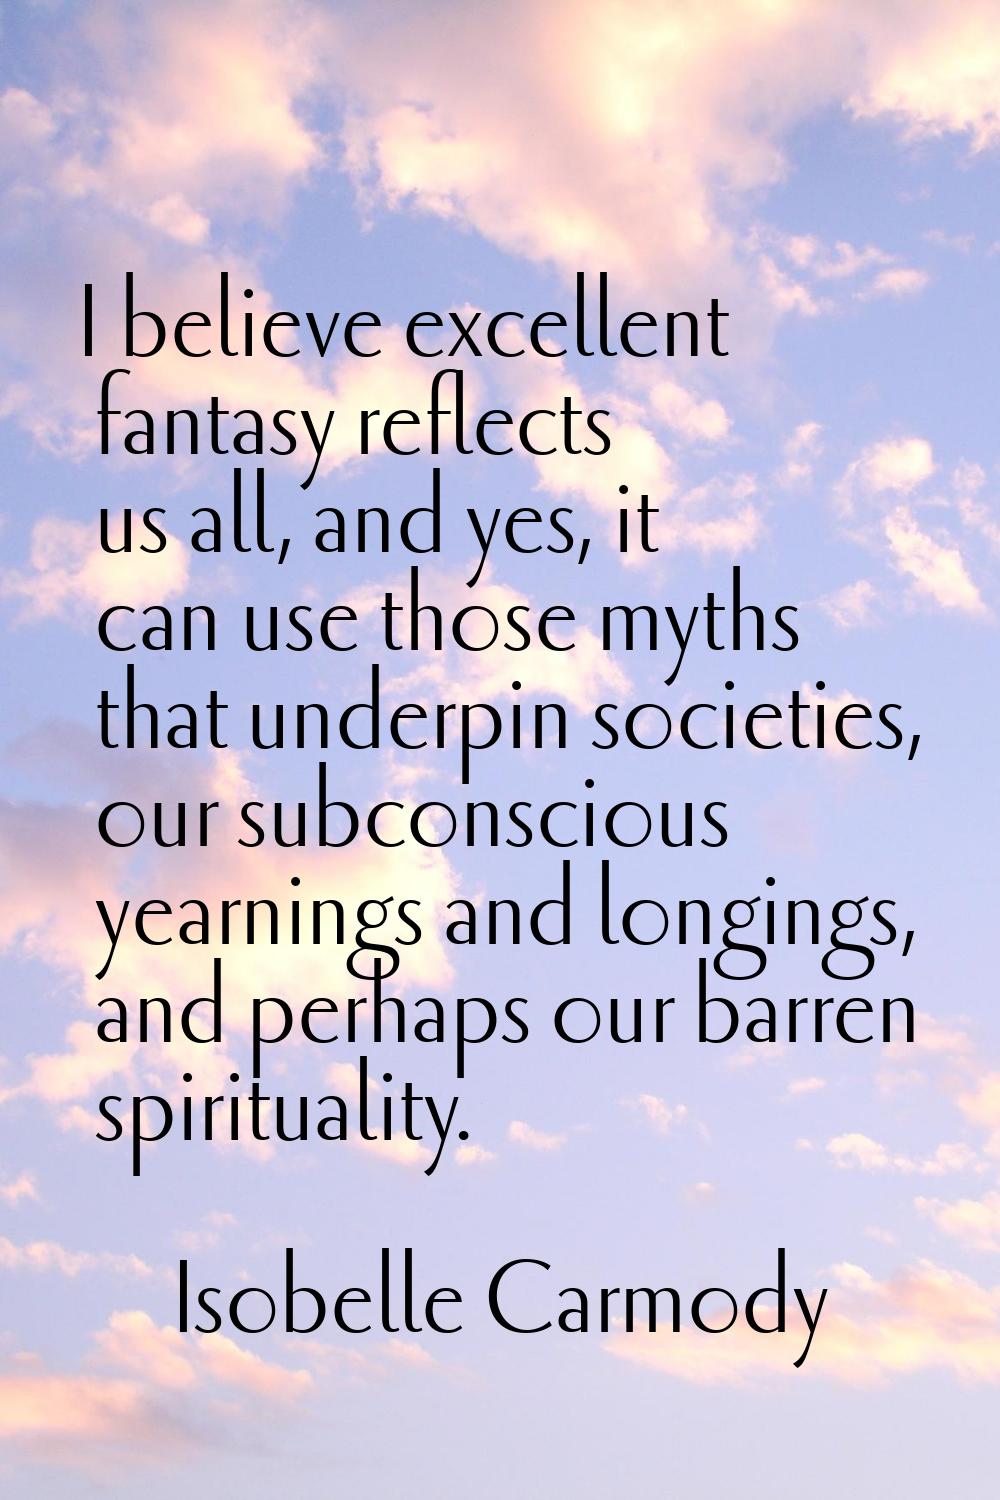 I believe excellent fantasy reflects us all, and yes, it can use those myths that underpin societie